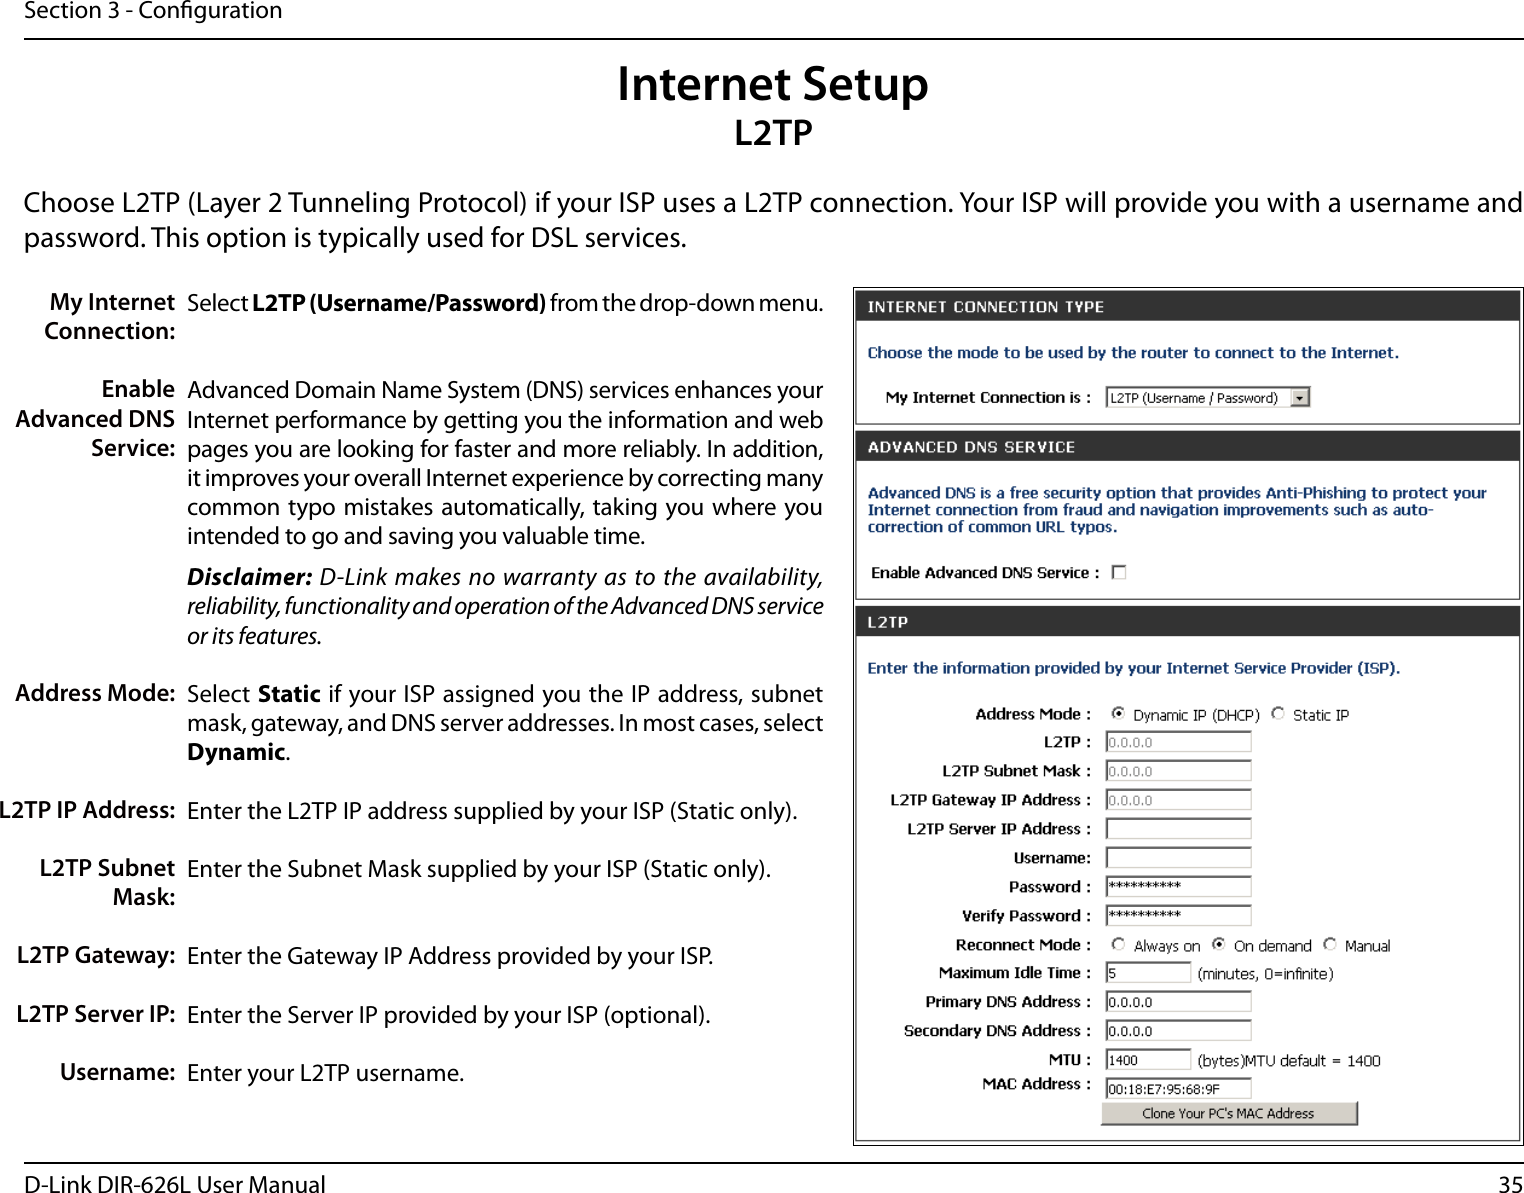 35D-Link DIR-626L User ManualSection 3 - CongurationSelect L2TP (Username/Password) from the drop-down menu.Advanced Domain Name System (DNS) services enhances your Internet performance by getting you the information and web pages you are looking for faster and more reliably. In addition, it improves your overall Internet experience by correcting many common typo mistakes automatically, taking you where you intended to go and saving you valuable time.Disclaimer: D-Link makes no warranty as to the availability, reliability, functionality and operation of the Advanced DNS service or its features.Select Static if your ISP assigned you the IP address, subnet mask, gateway, and DNS server addresses. In most cases, select Dynamic.Enter the L2TP IP address supplied by your ISP (Static only).Enter the Subnet Mask supplied by your ISP (Static only).Enter the Gateway IP Address provided by your ISP.Enter the Server IP provided by your ISP (optional).Enter your L2TP username.My Internet Connection:Enable Advanced DNS Service:Address Mode:L2TP IP Address:L2TP Subnet Mask:L2TP Gateway:L2TP Server IP:Username:Internet SetupL2TPChoose L2TP (Layer 2 Tunneling Protocol) if your ISP uses a L2TP connection. Your ISP will provide you with a username and password. This option is typically used for DSL services. 